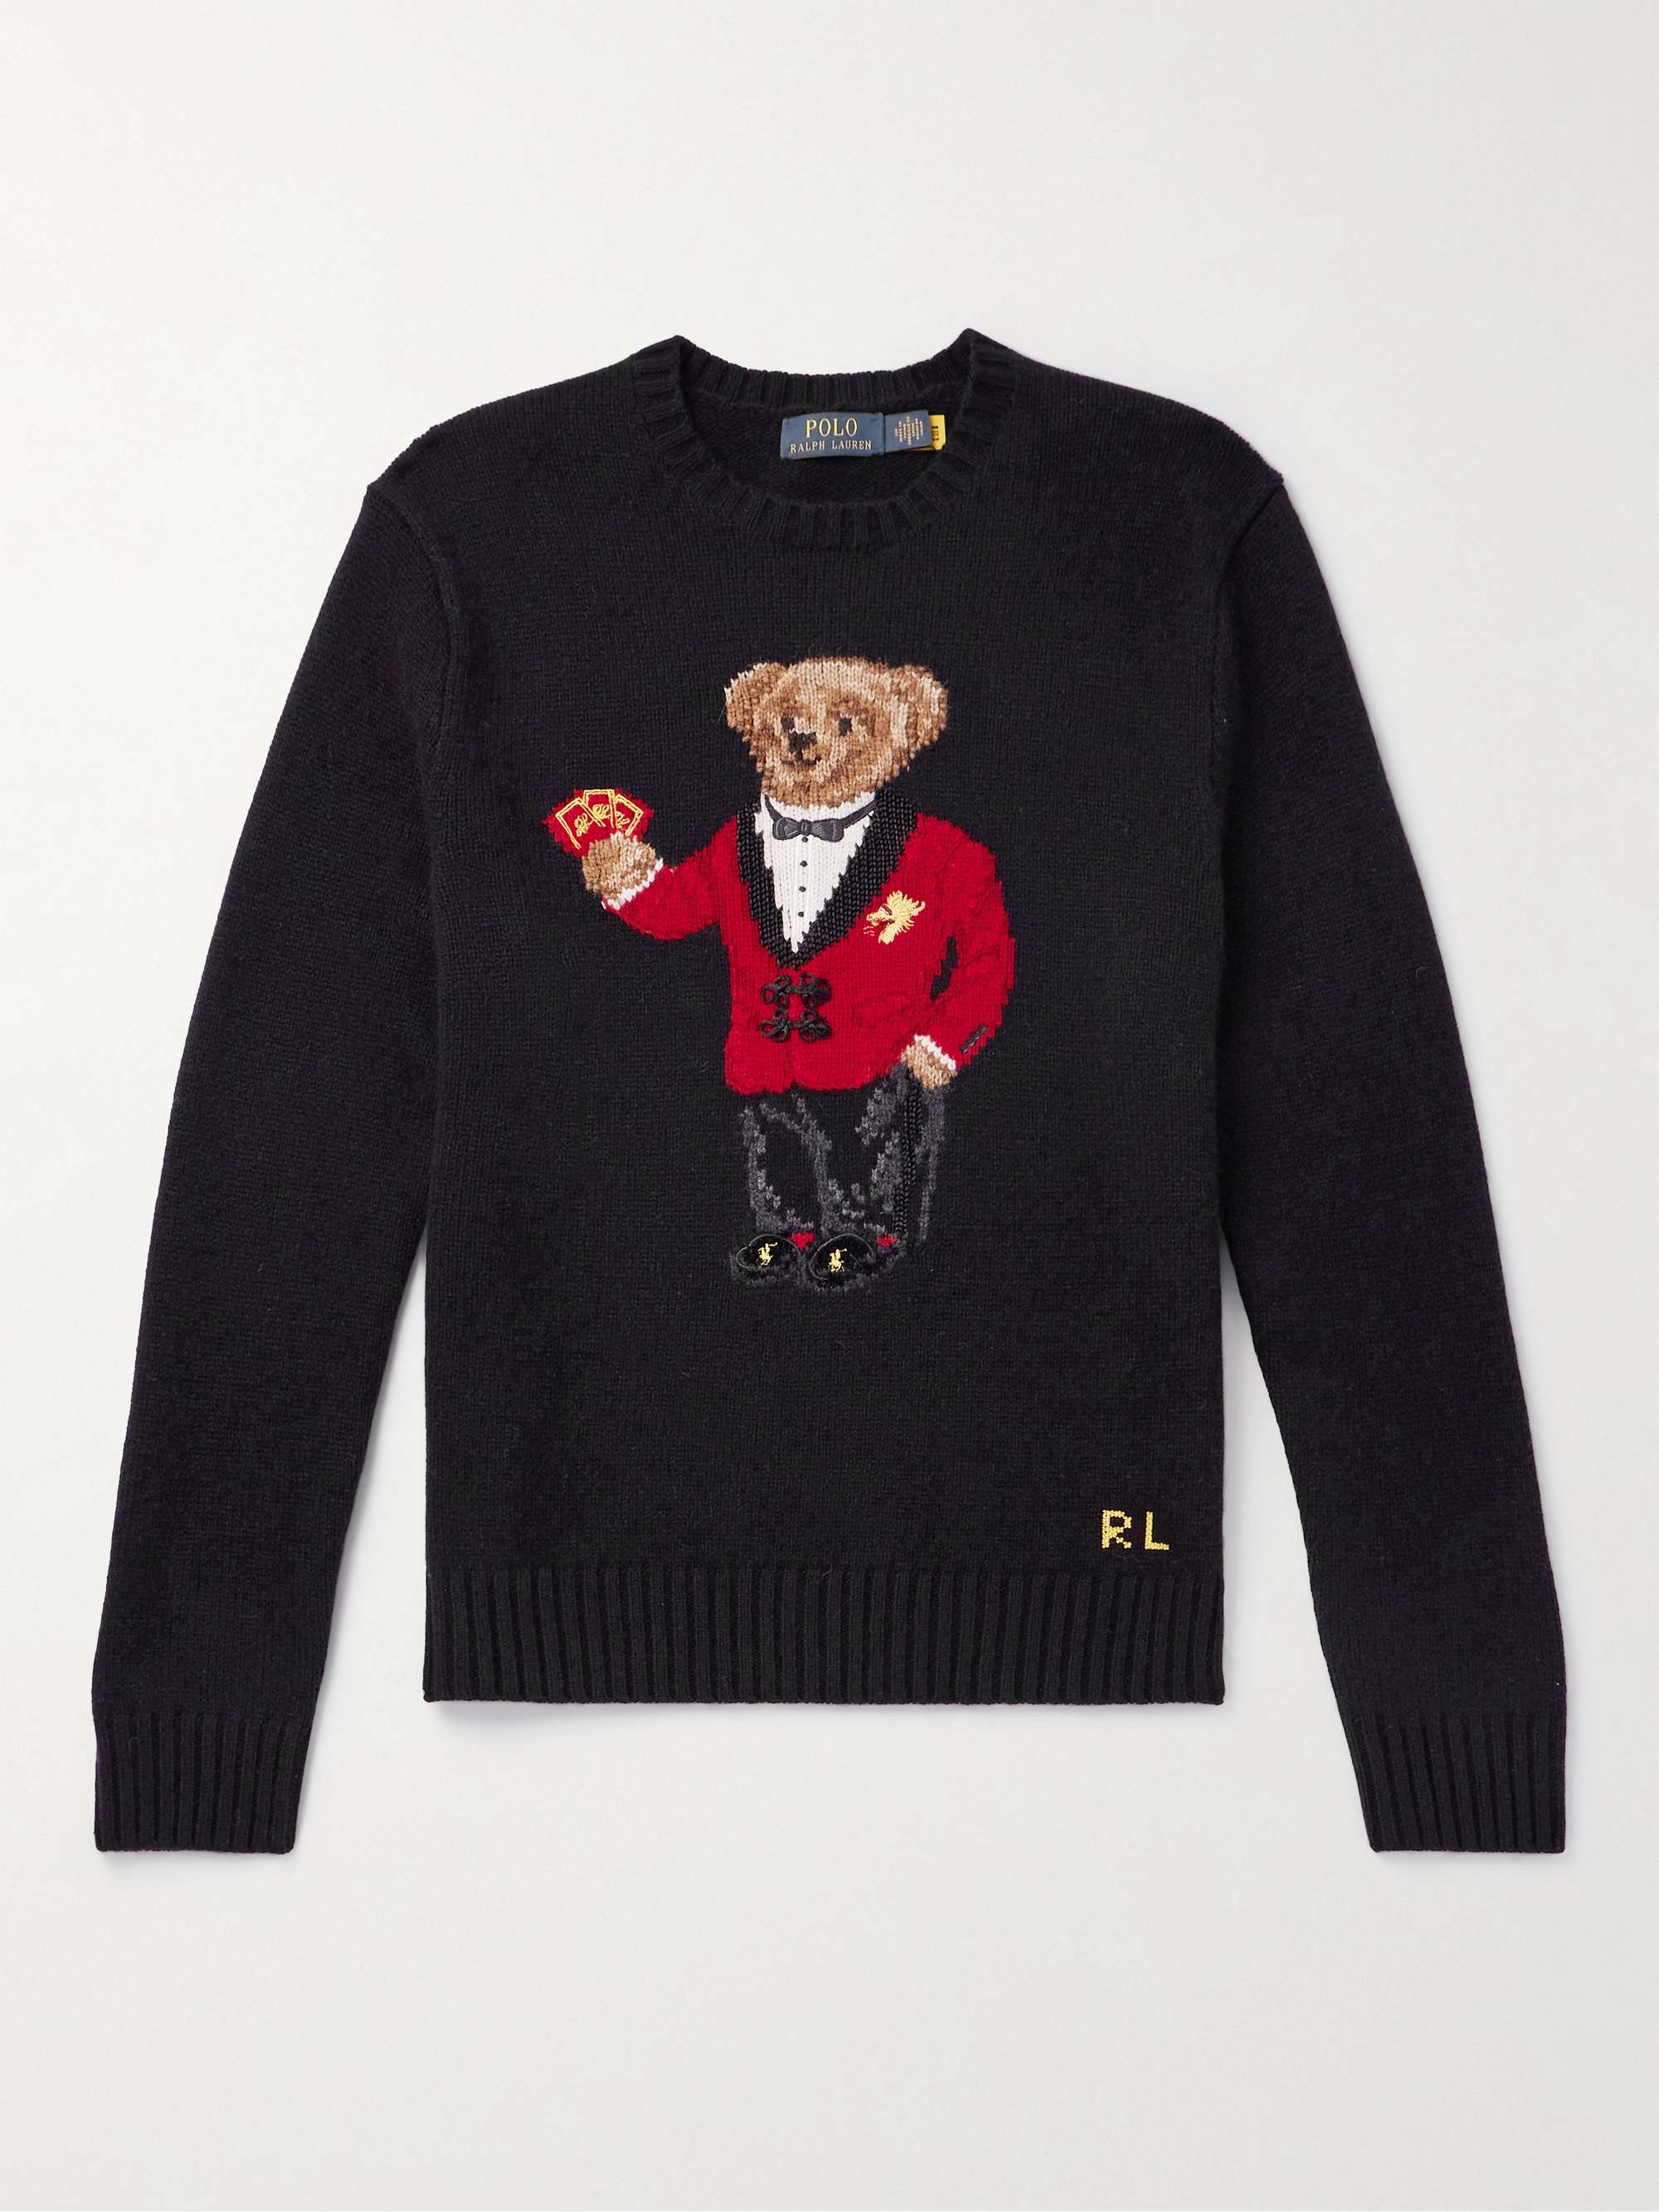 POLO RALPH LAUREN Embroidered Intarsia Wool Sweater for Men | MR PORTER